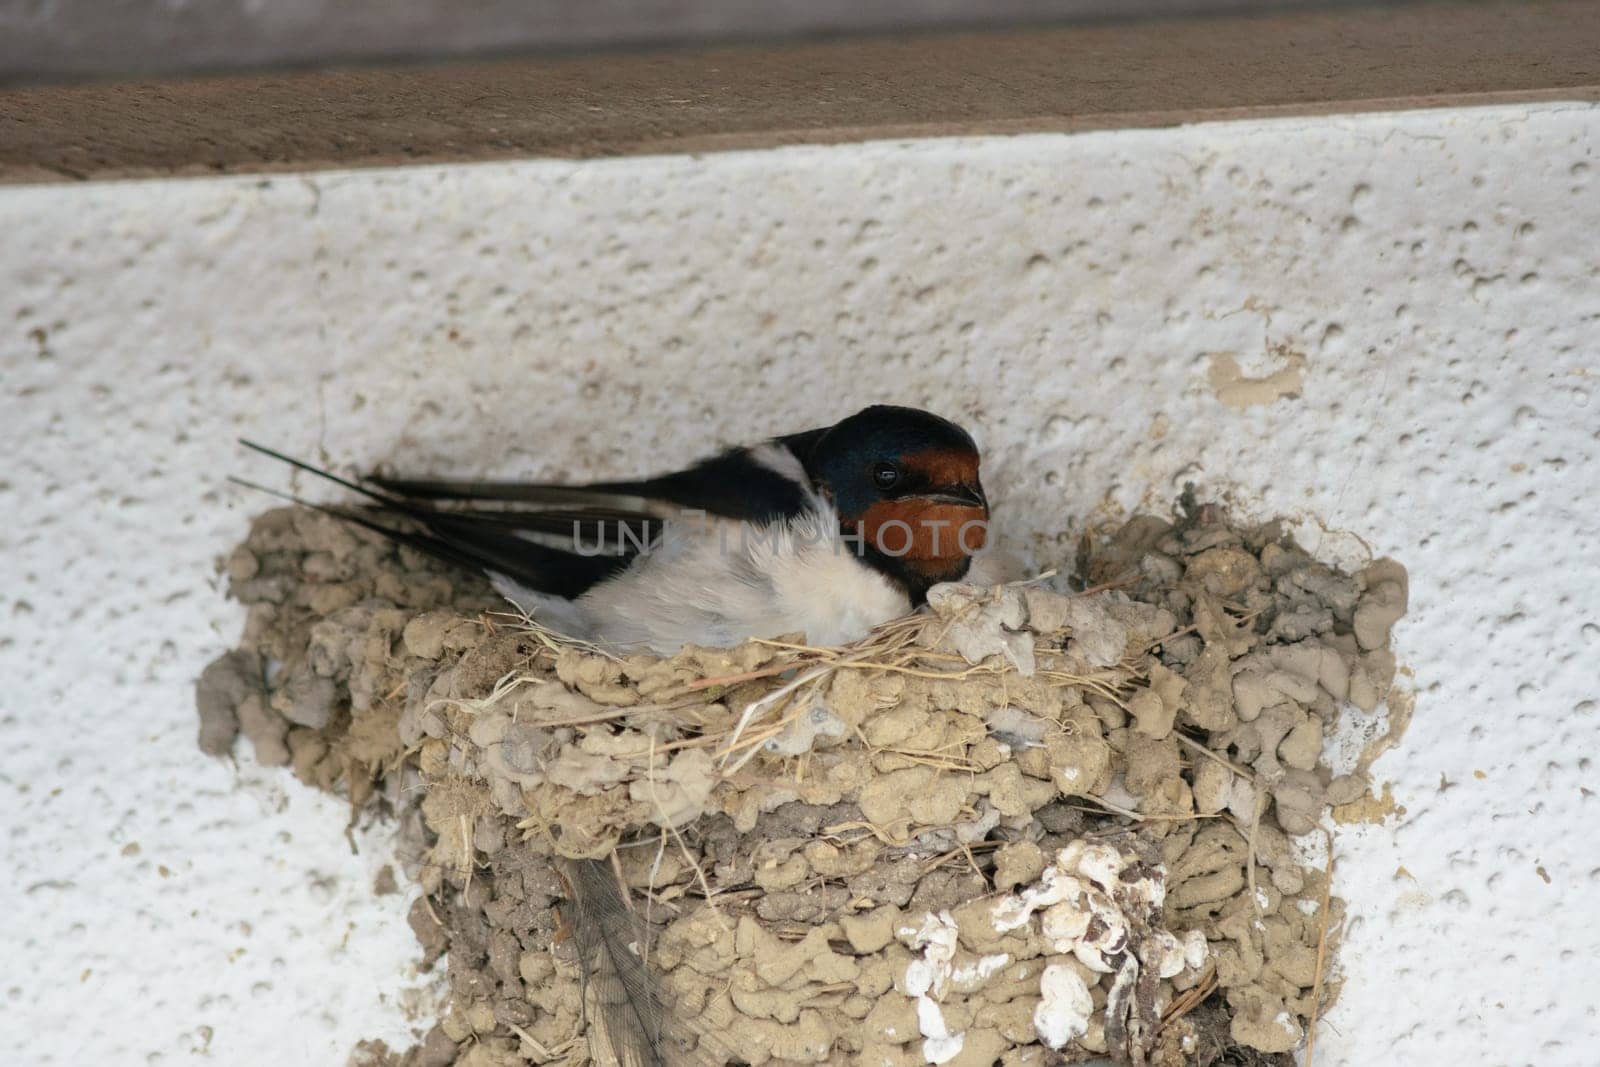 Swallow resting in its mud nest attached to a white wall, showcasing wildlife in urban settings.